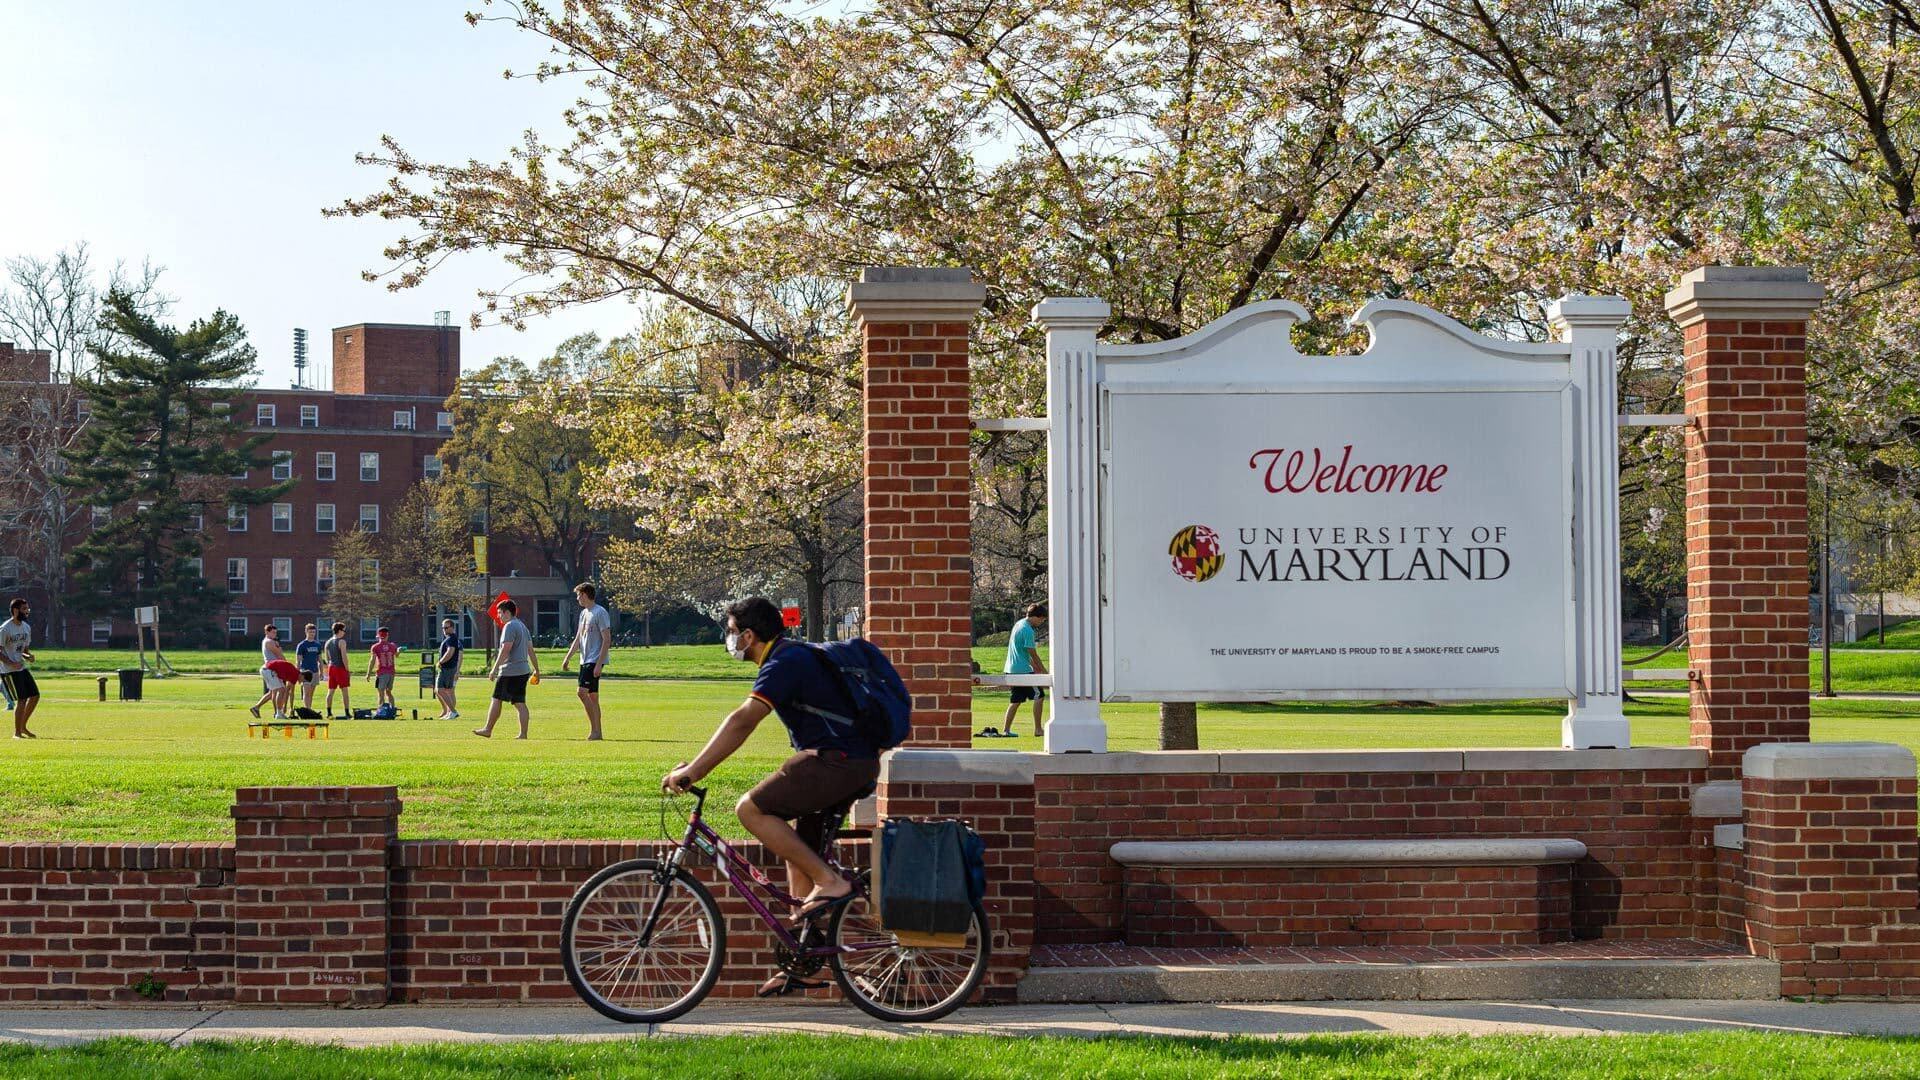 Student rides bike past "Welcome: University of Maryland" sign